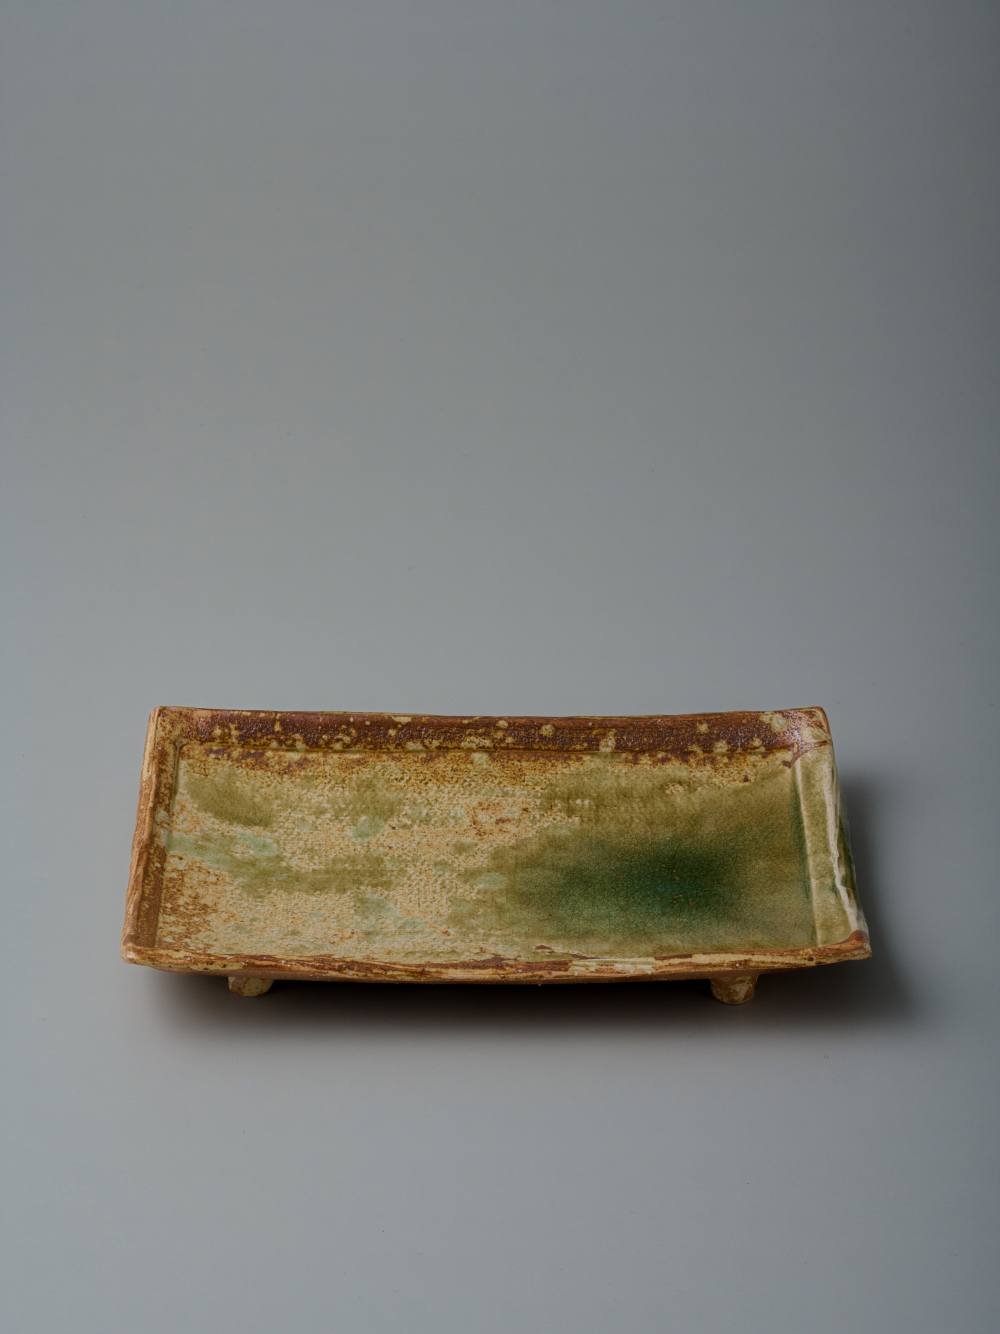 Long Rectangle Plate with Legs<br />Wood ash glaze